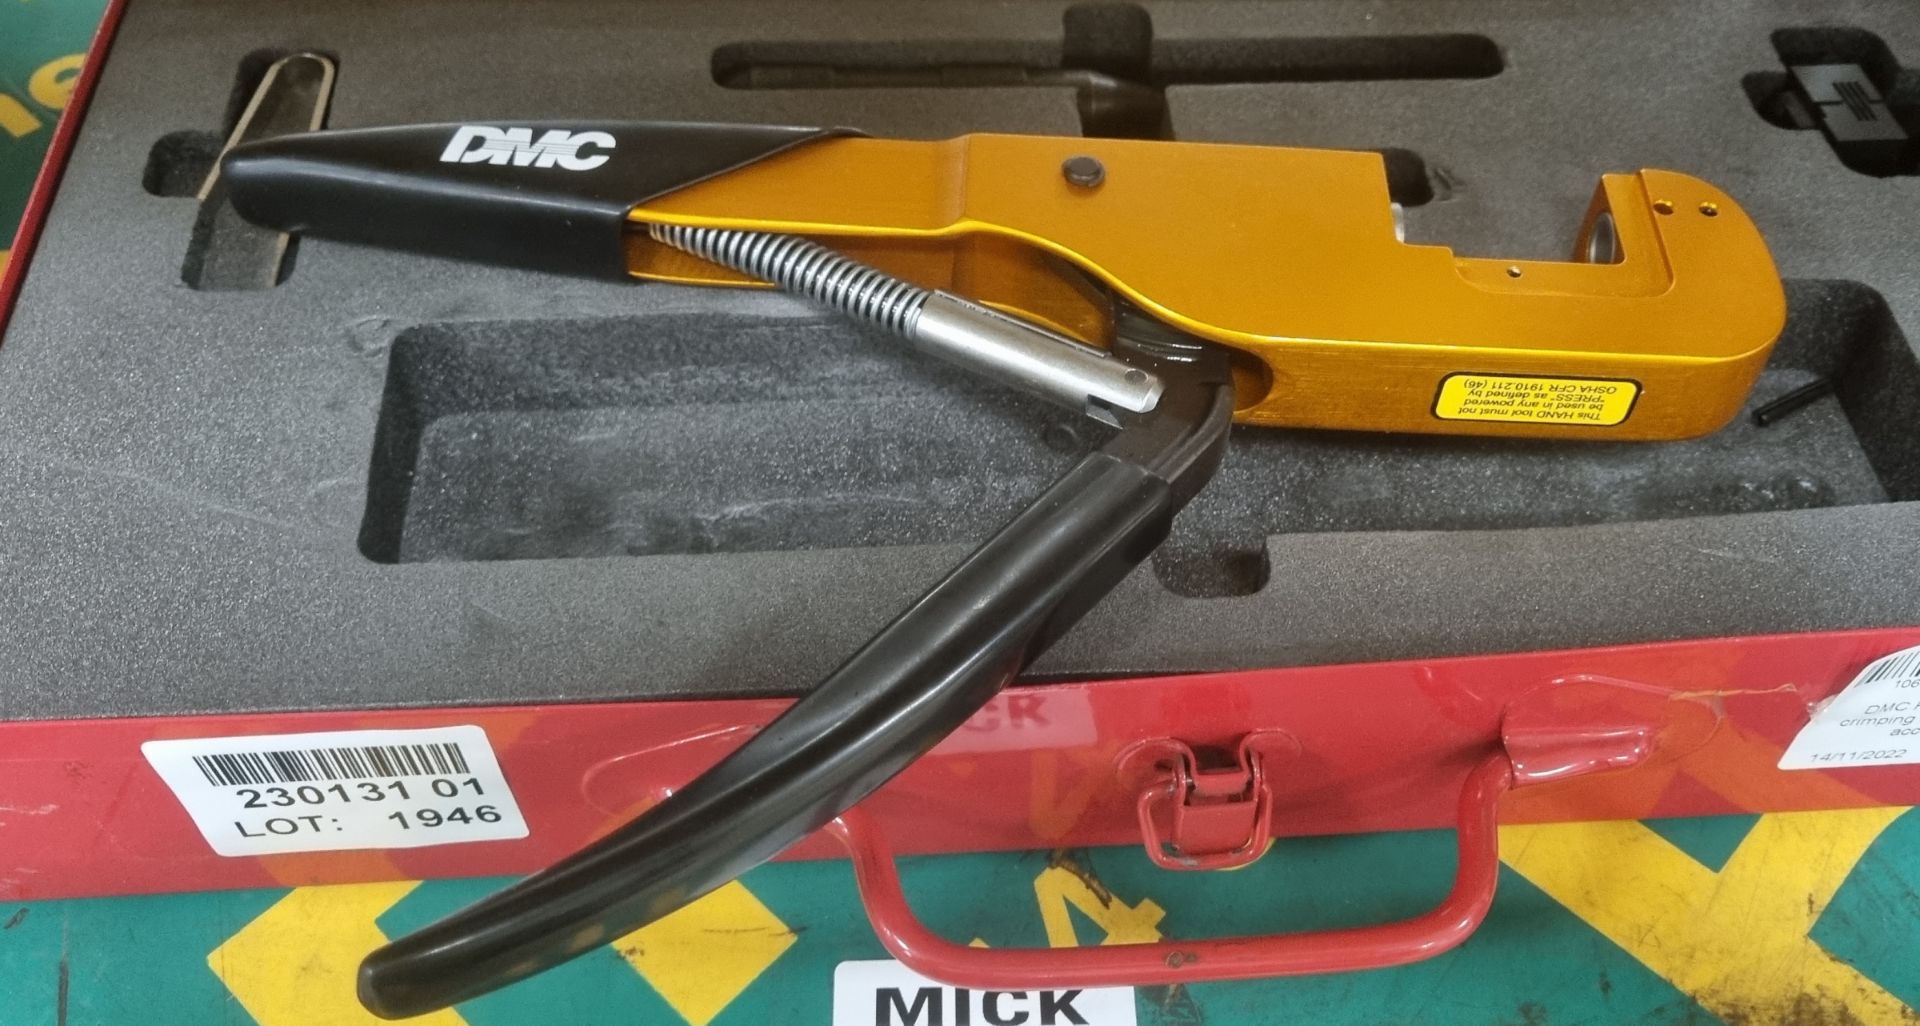 DMC HX4 open frame crimping tool - in box with accessories - Image 3 of 3